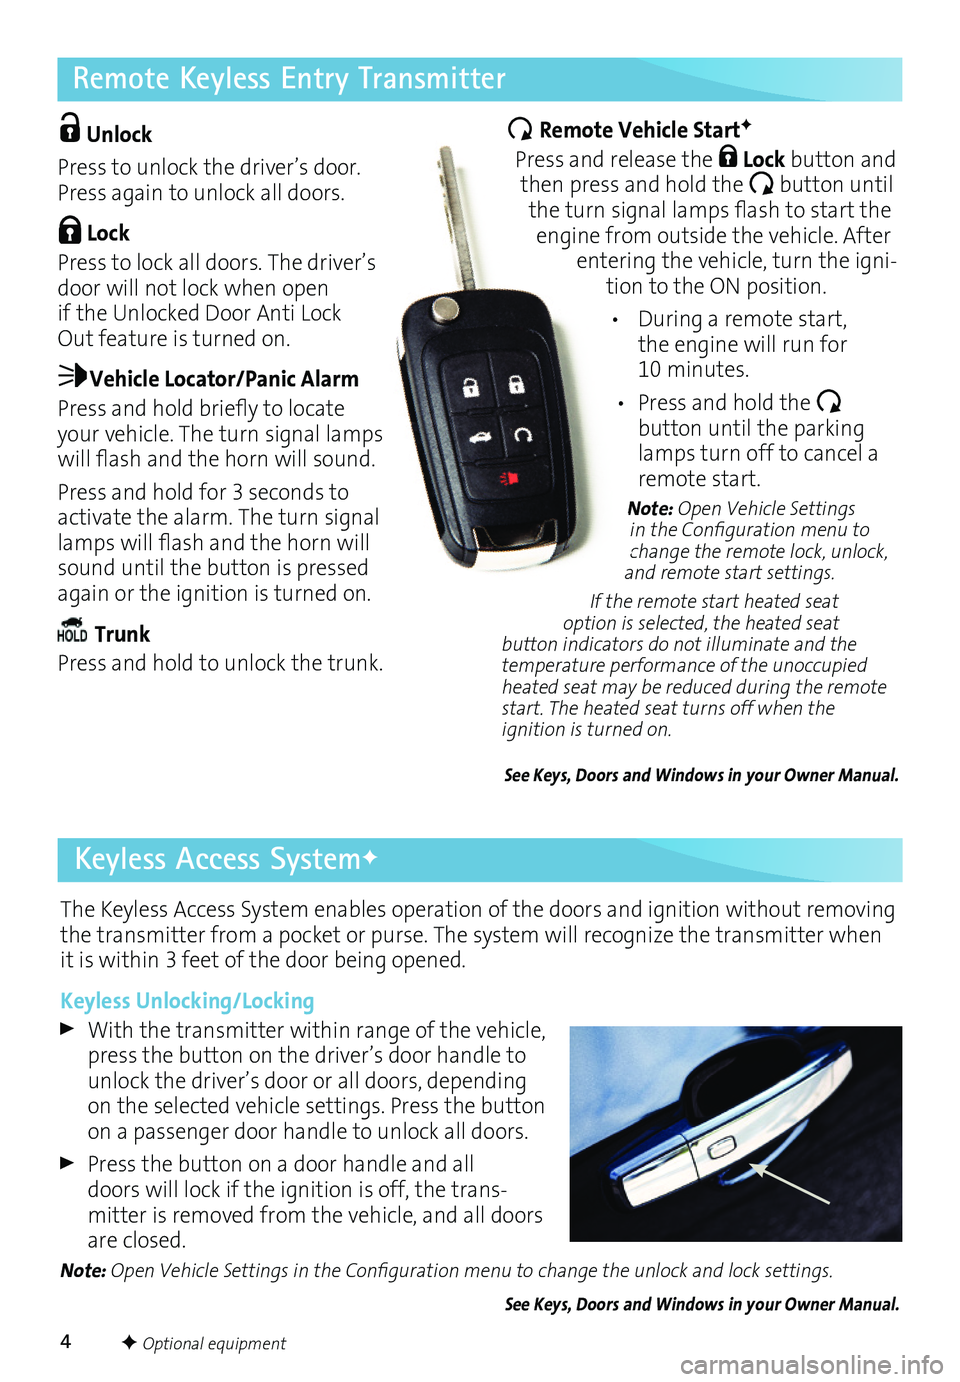 BUICK VERANO 2017  Get To Know Guide 4
Remote Keyless Entry Transmitter
The Keyless Access System enables operation of the doors and ignition without removing the transmitter from a pocket or purse. The system will recognize the transmit